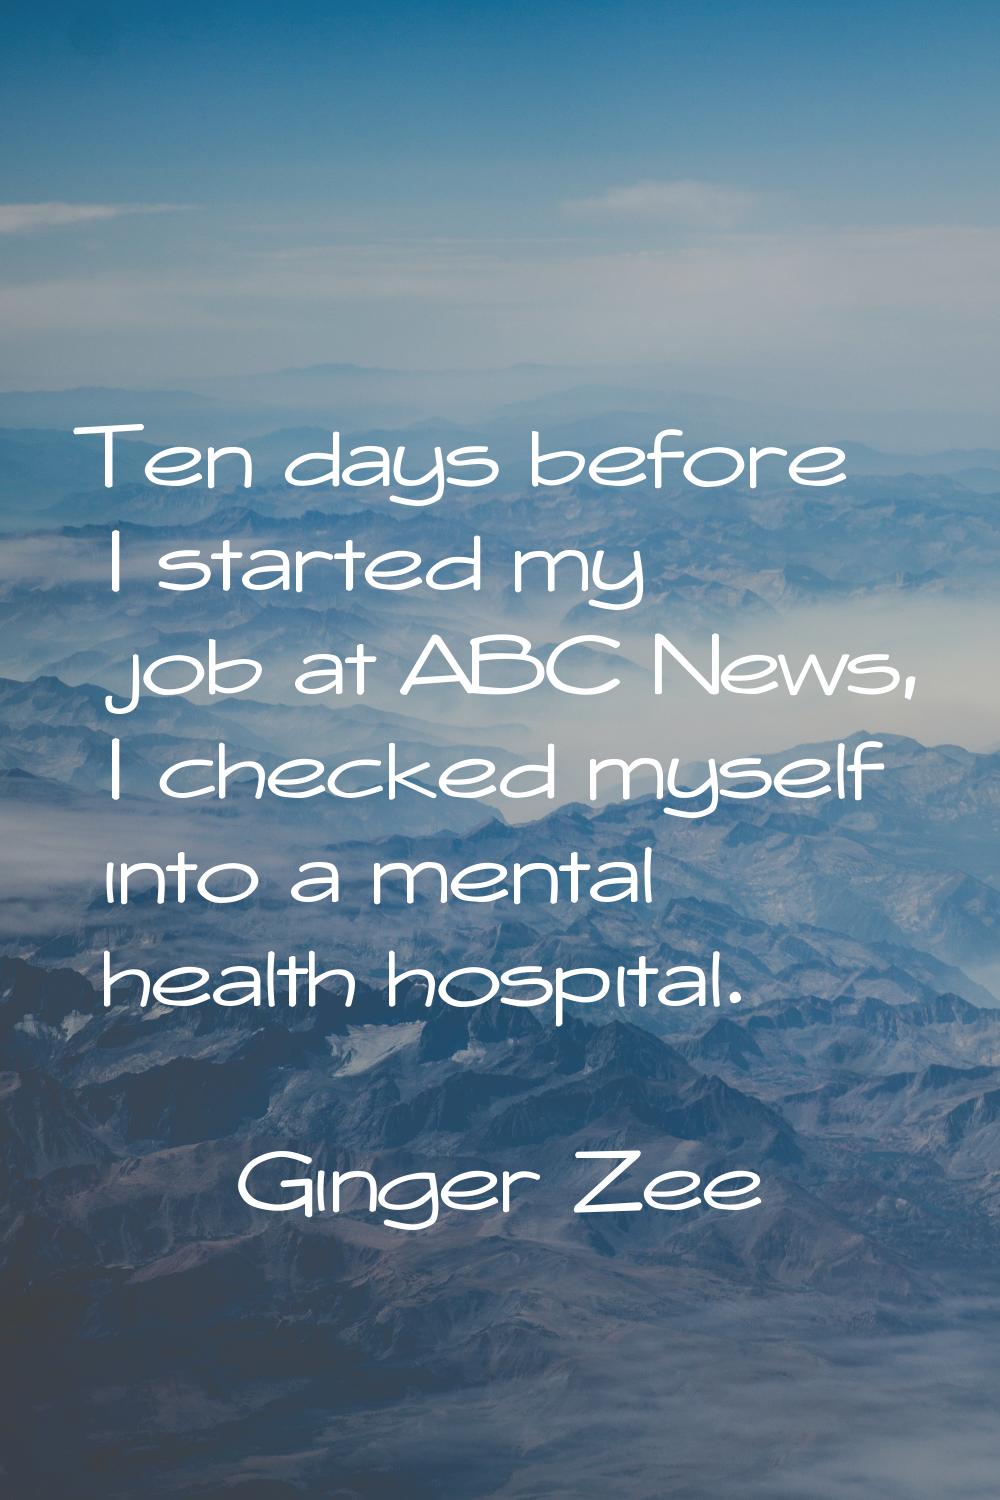 Ten days before I started my job at ABC News, I checked myself into a mental health hospital.